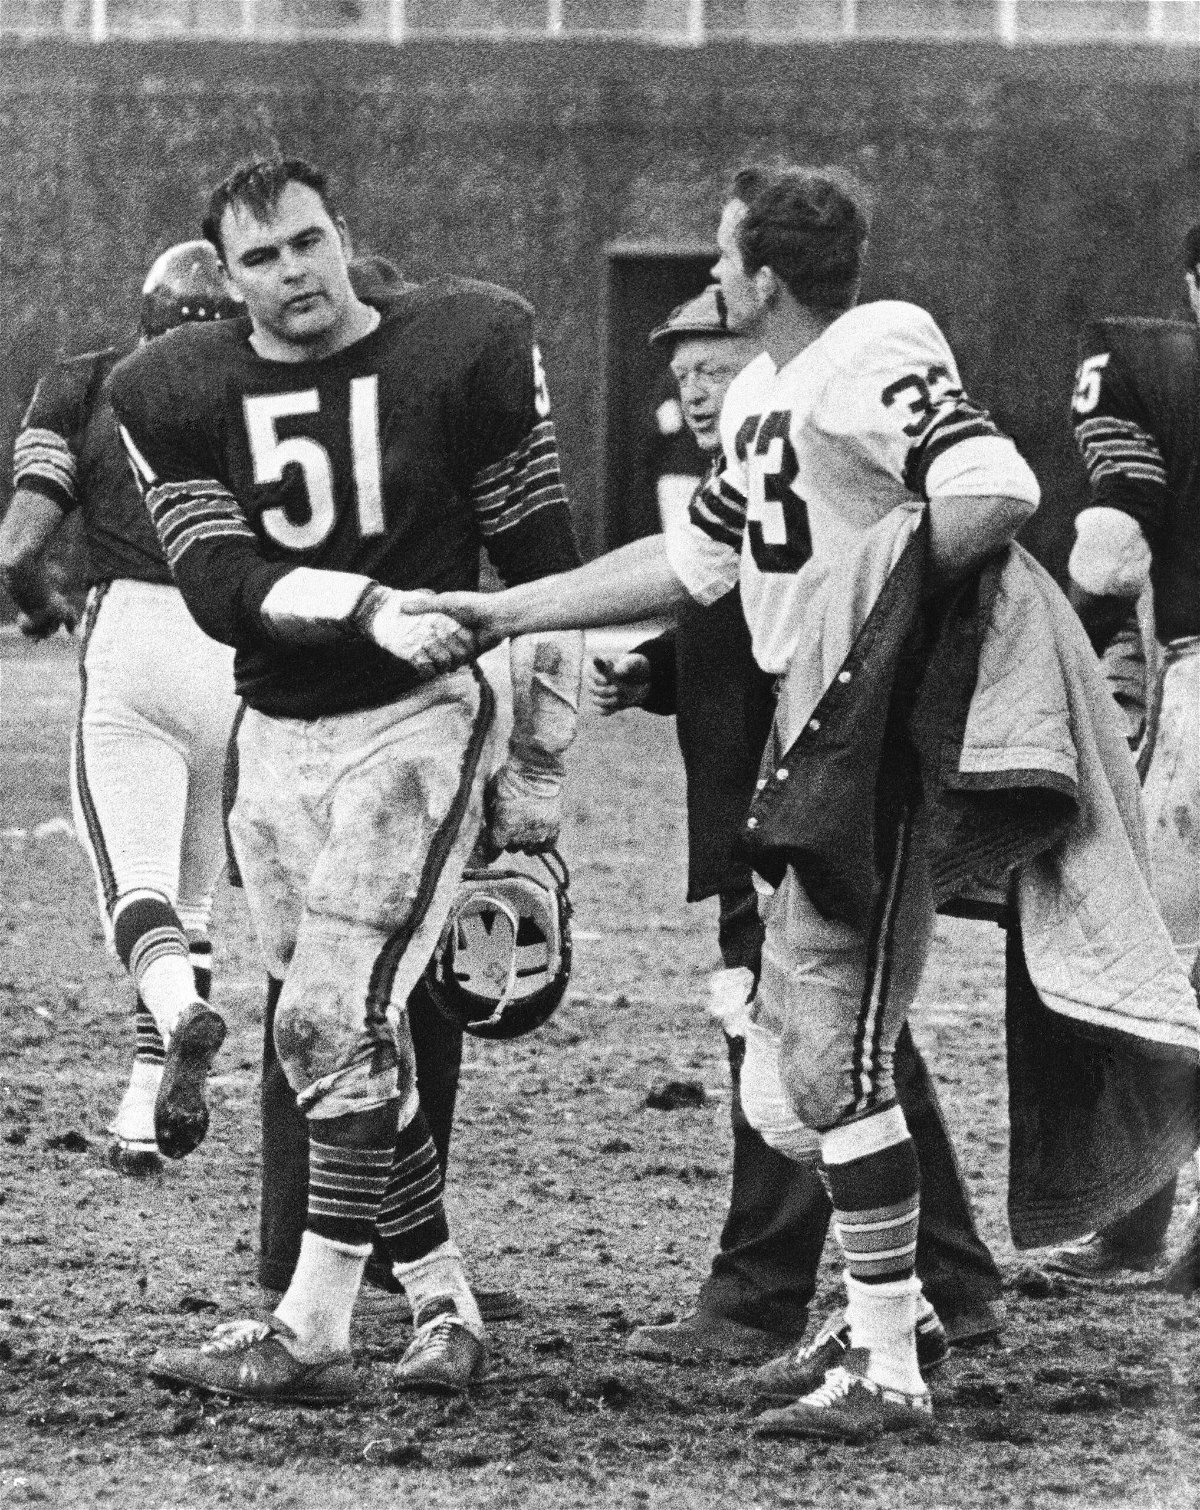 FILE - Chicago Bears' Dick Butkus (51) shakes hands with Green Bay Packers' Jim Grabowski after an NFL football game in Chicago, Nov. 26, 1967. Butkus and Grabowski were teammates at the University of Illinois several years ago. Butkus, a fearsome middle linebacker for the Bears, has died, the team announced Thursday, Oct. 5, 2023. He was 80. According to a statement released by the team, Butkus' family confirmed that he died in his sleep overnight at his home in Malibu, California.